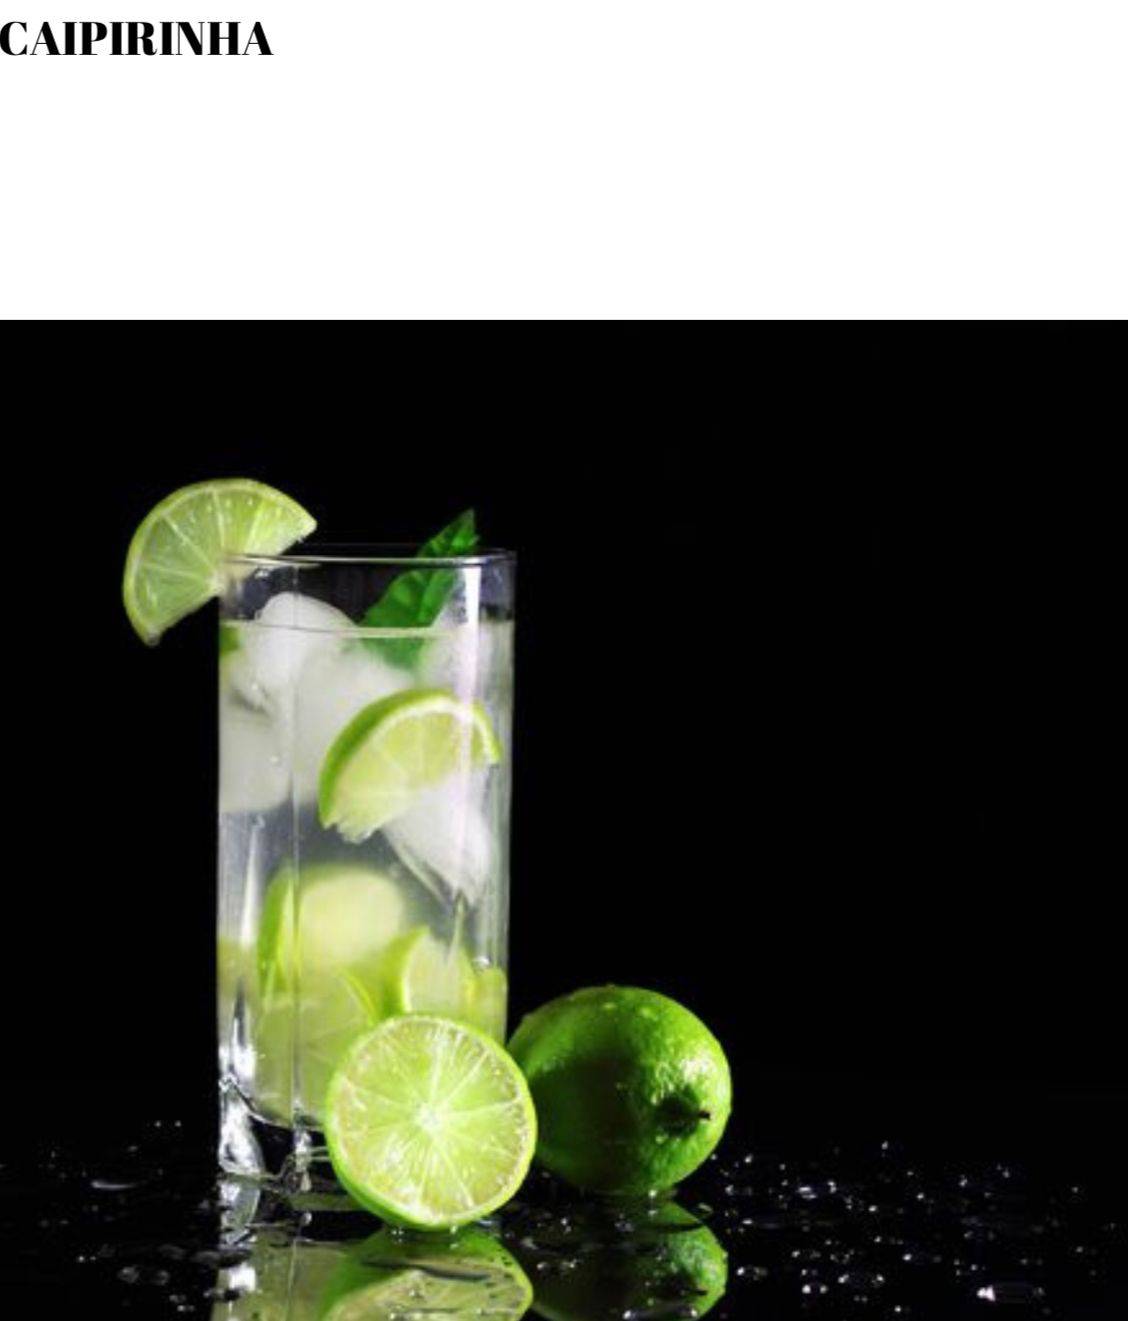 A glass of water with lime slices and ice.